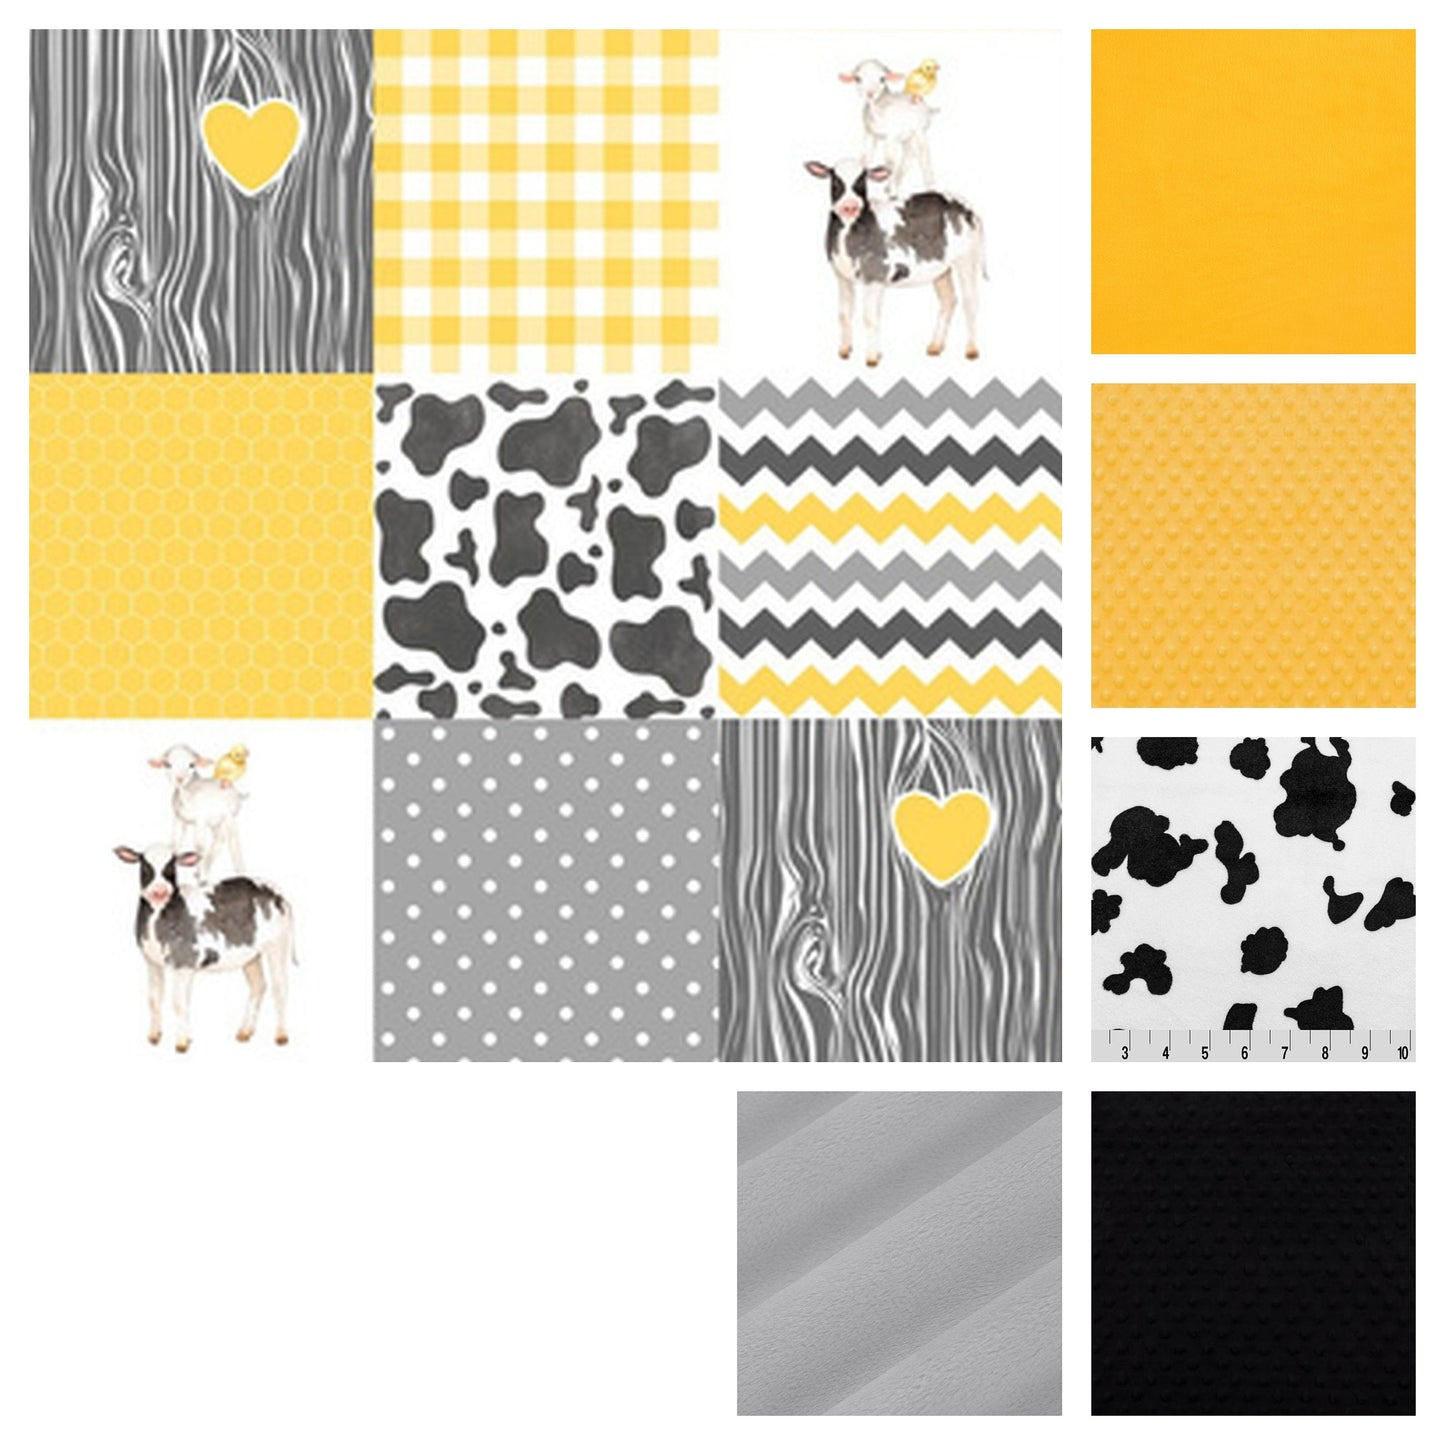 minky options - flat yellow, yellow dot, cowhide, black, and gray